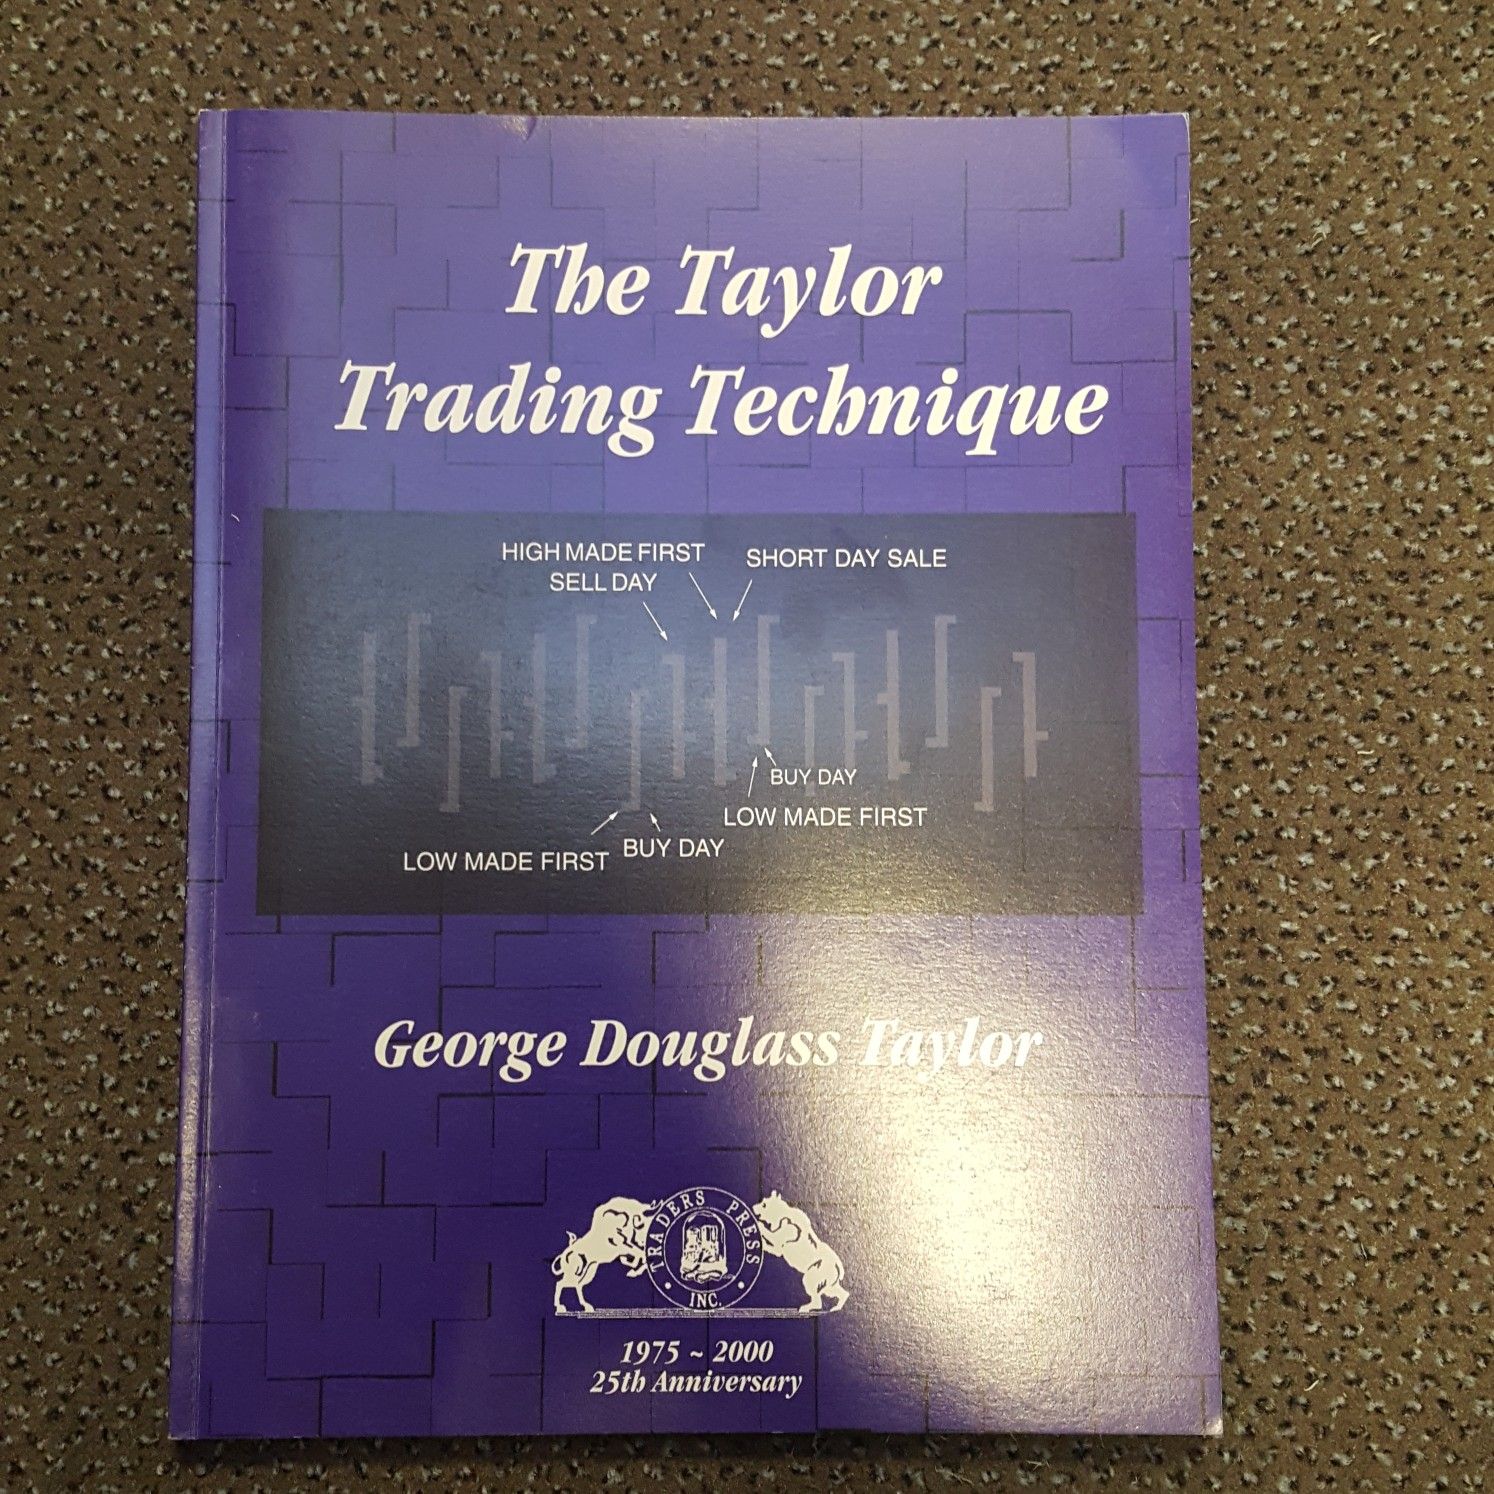 The Taylor Trading Technique